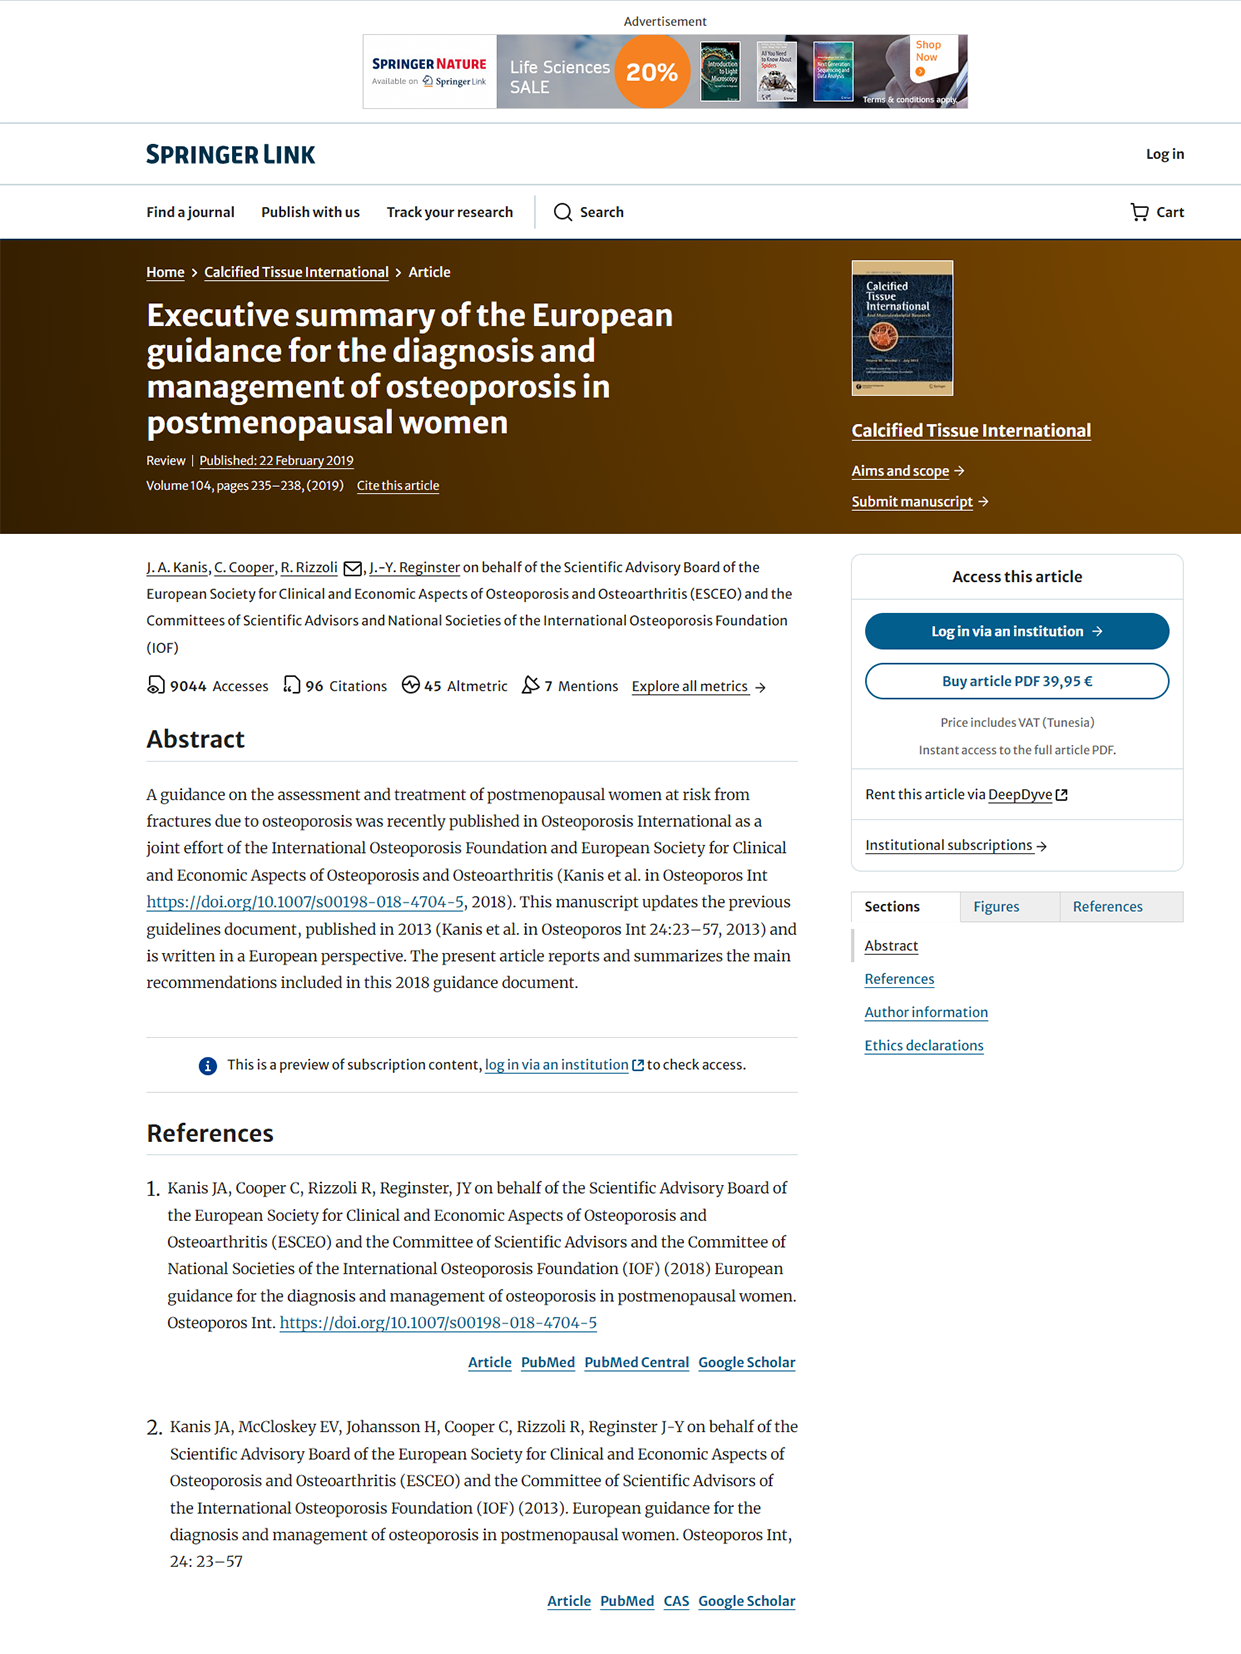 European guidance for the diagnosis & management of osteoporosis in postmenopausal women (ESCEO&IOF 2018)